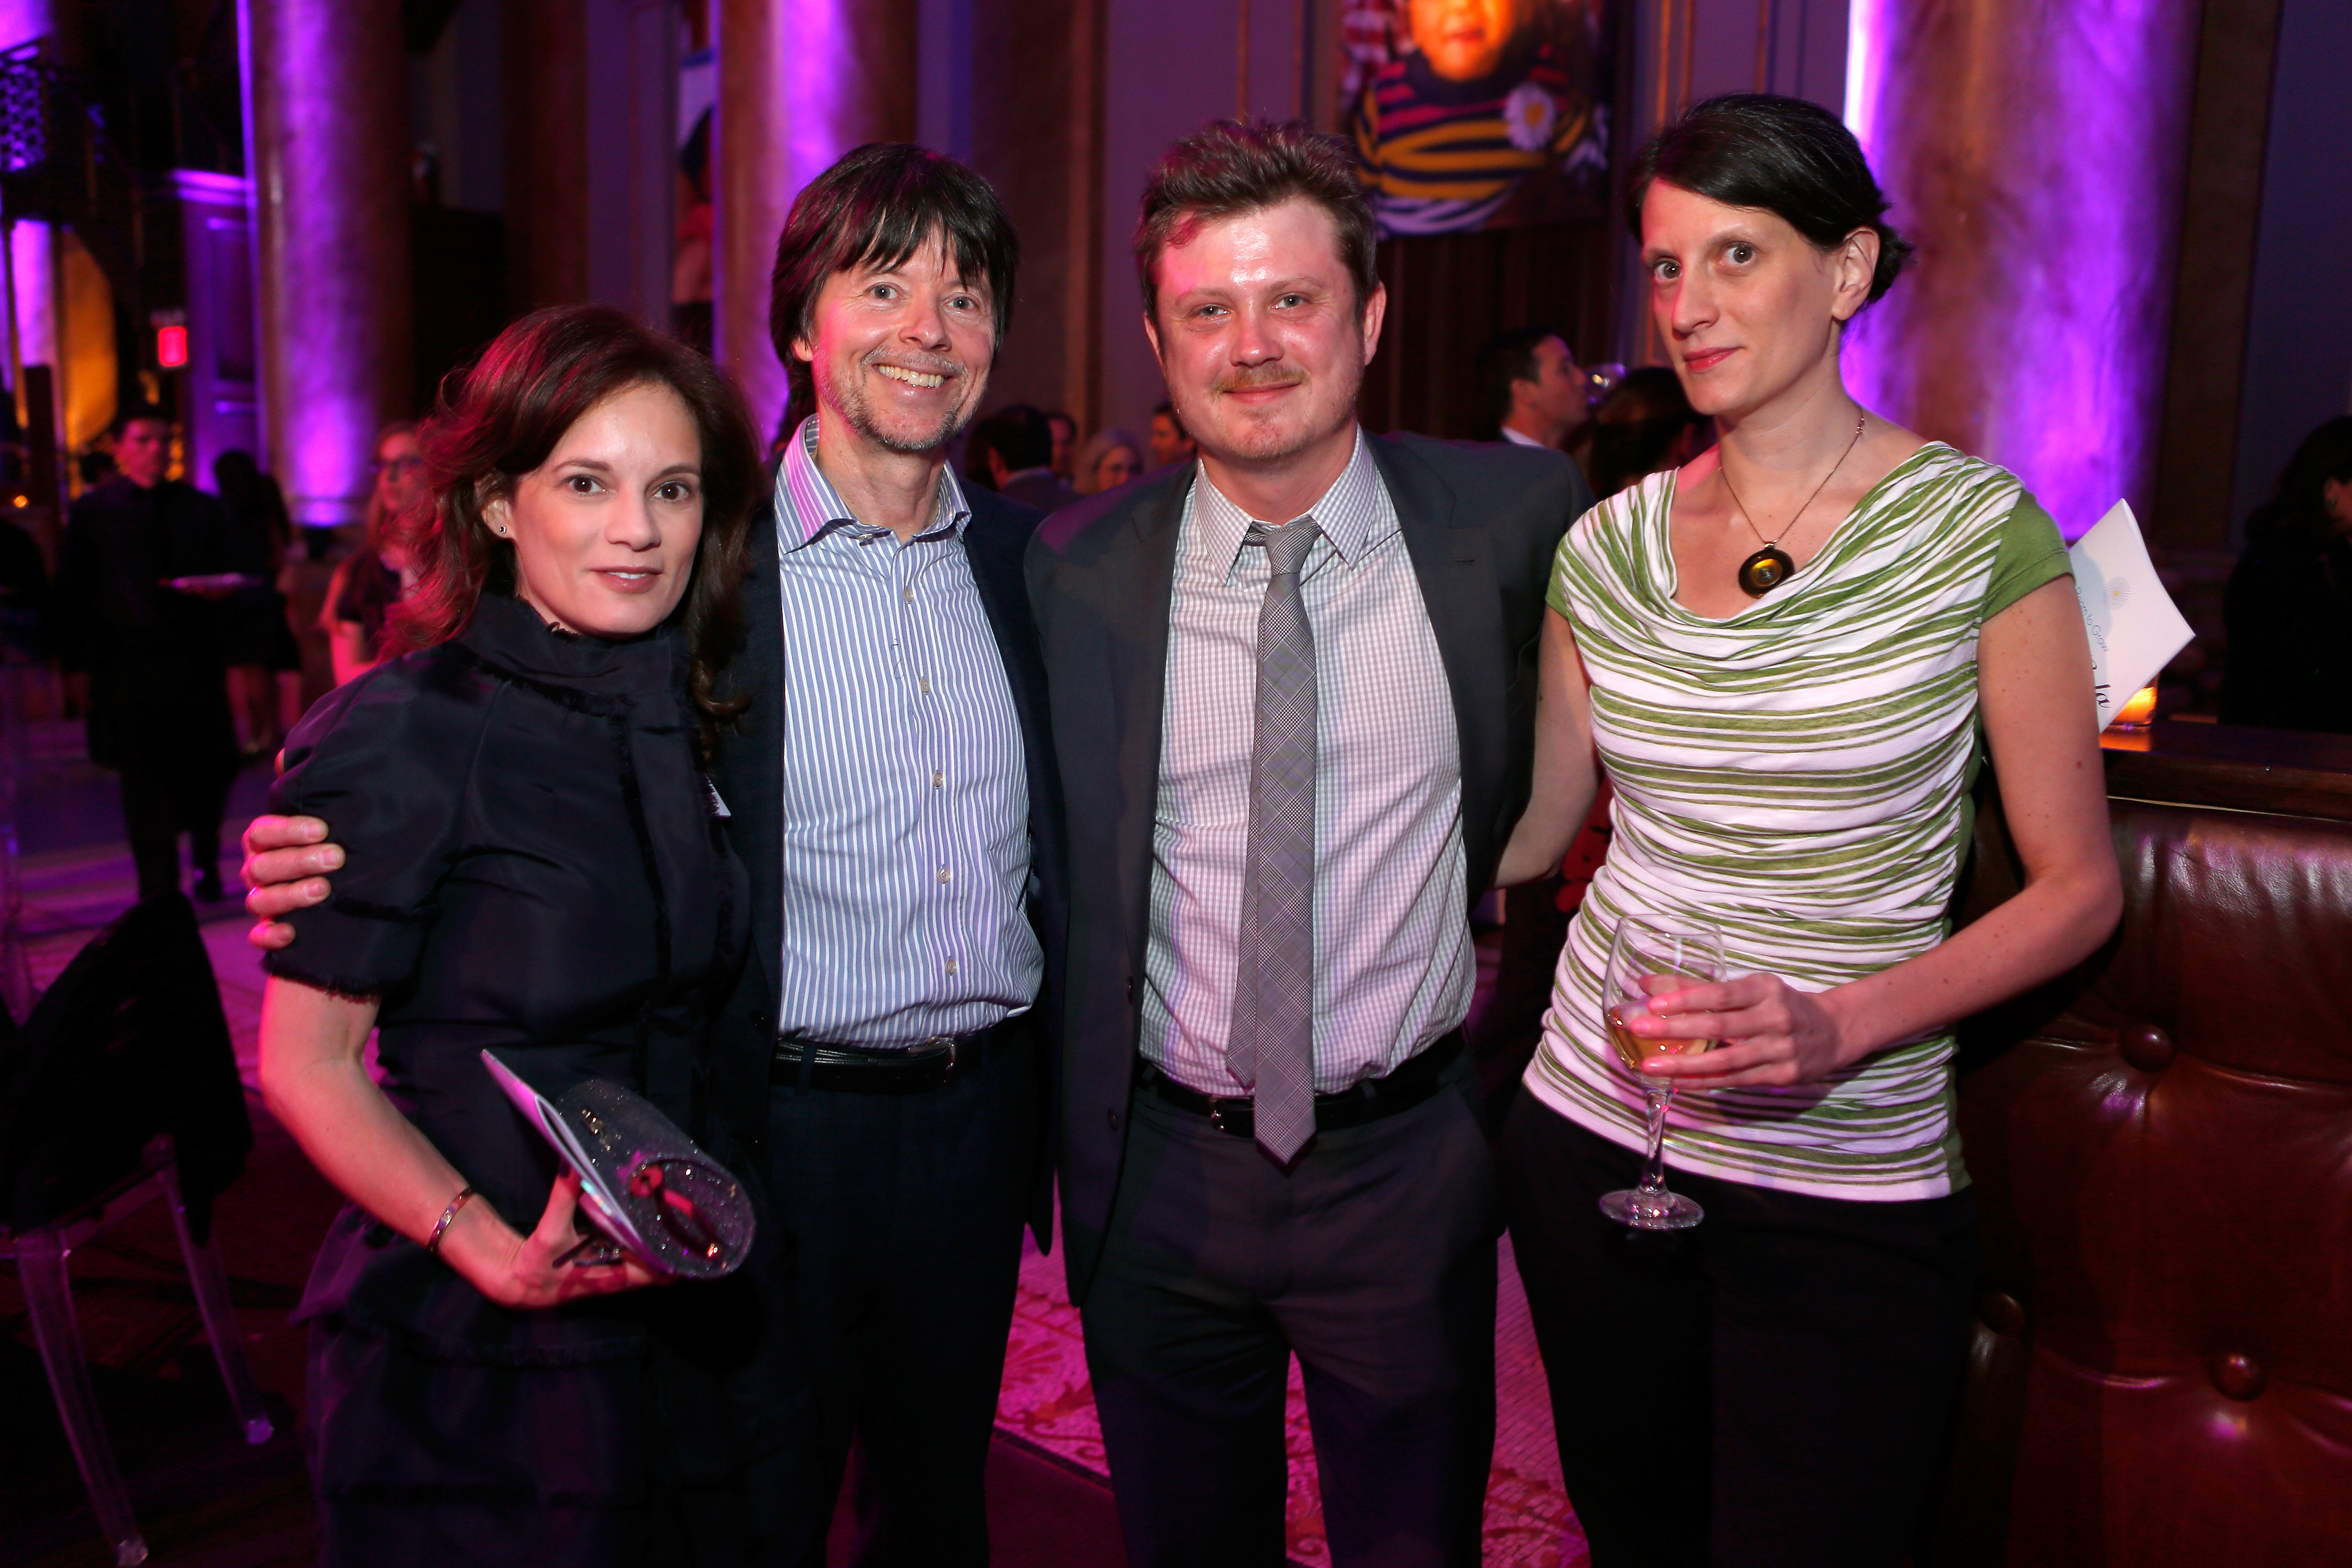 Julie Deborah Brown, Ken Burns, Beau Willimon, and Michelle Willimon during the 2014 Room To Grow Gala at Capitale on April 8, 2014, in New York City. | Source: Getty Images